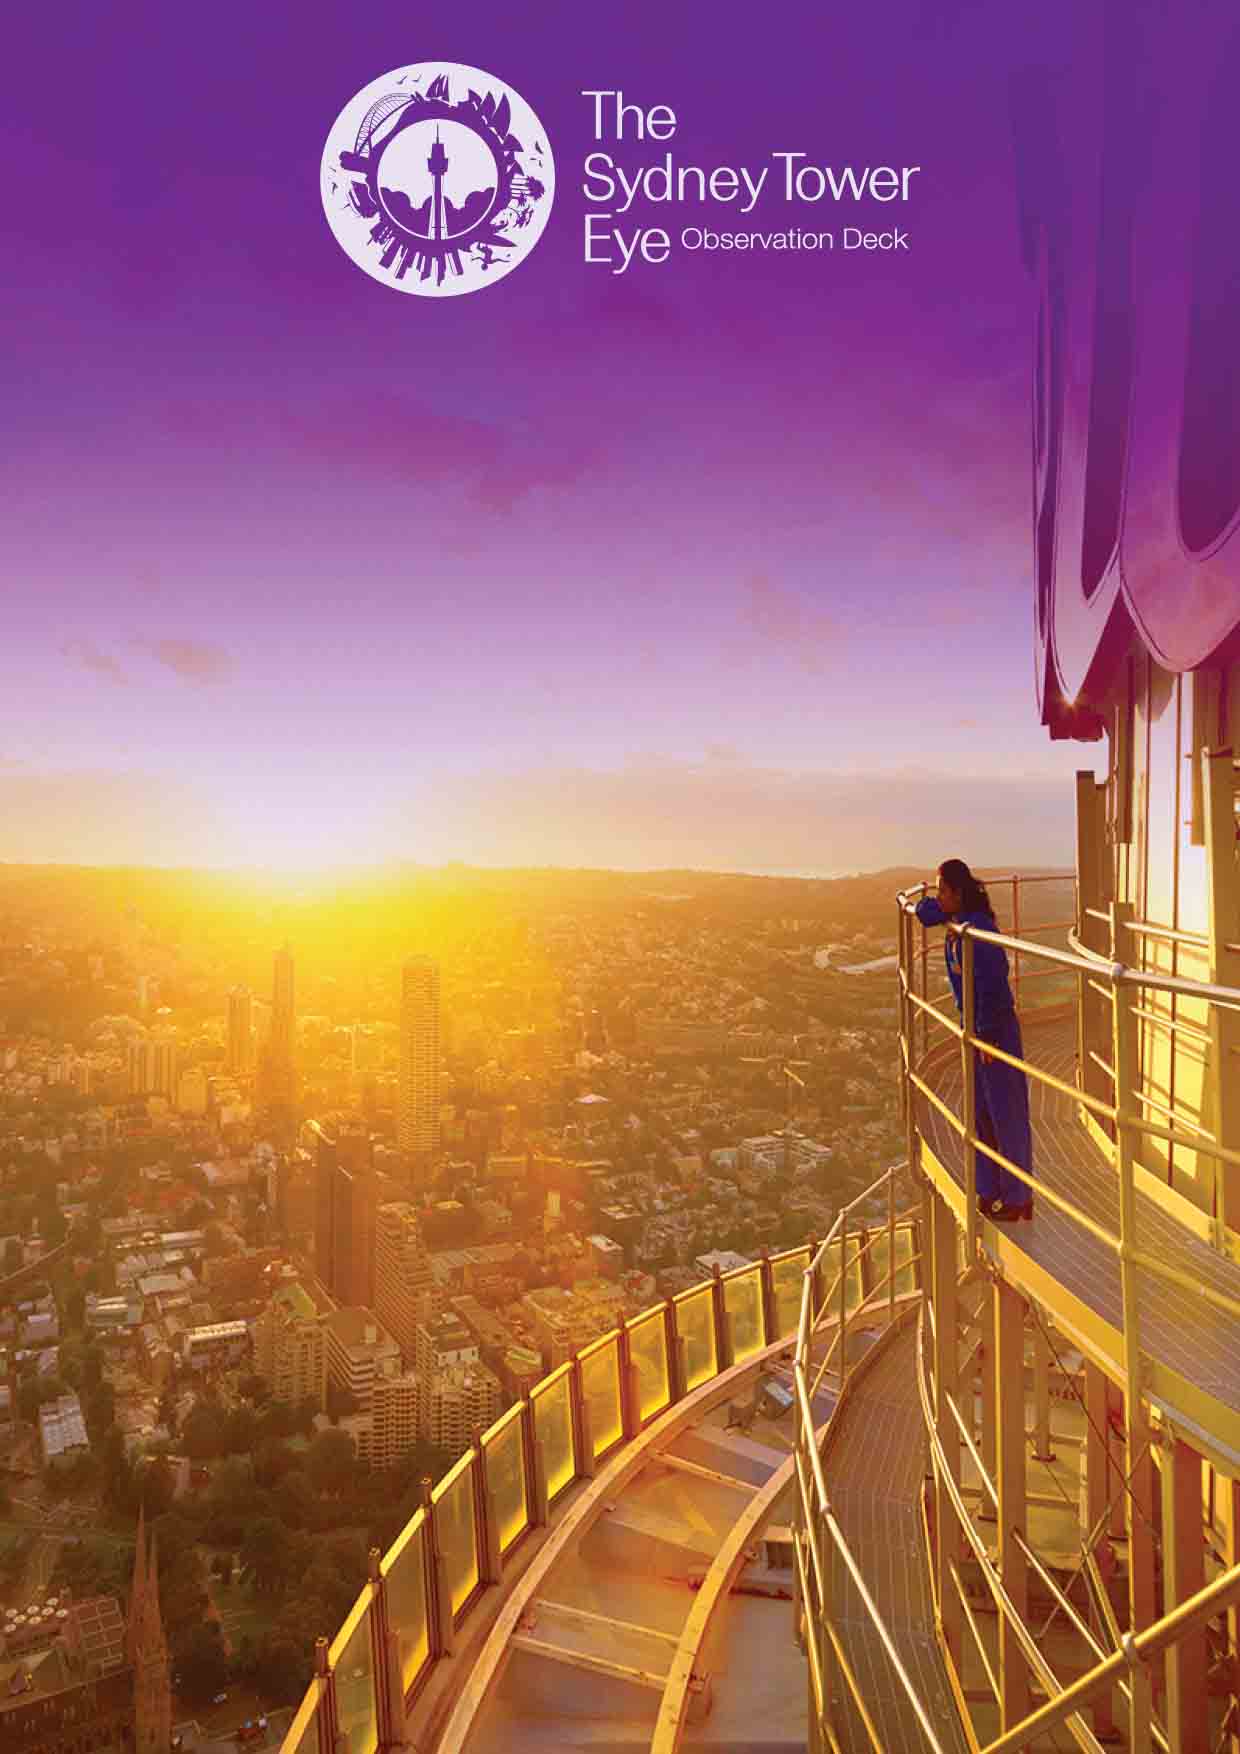 Sydney Tower Eye 4d Cinema Experience Amazing Views And - 